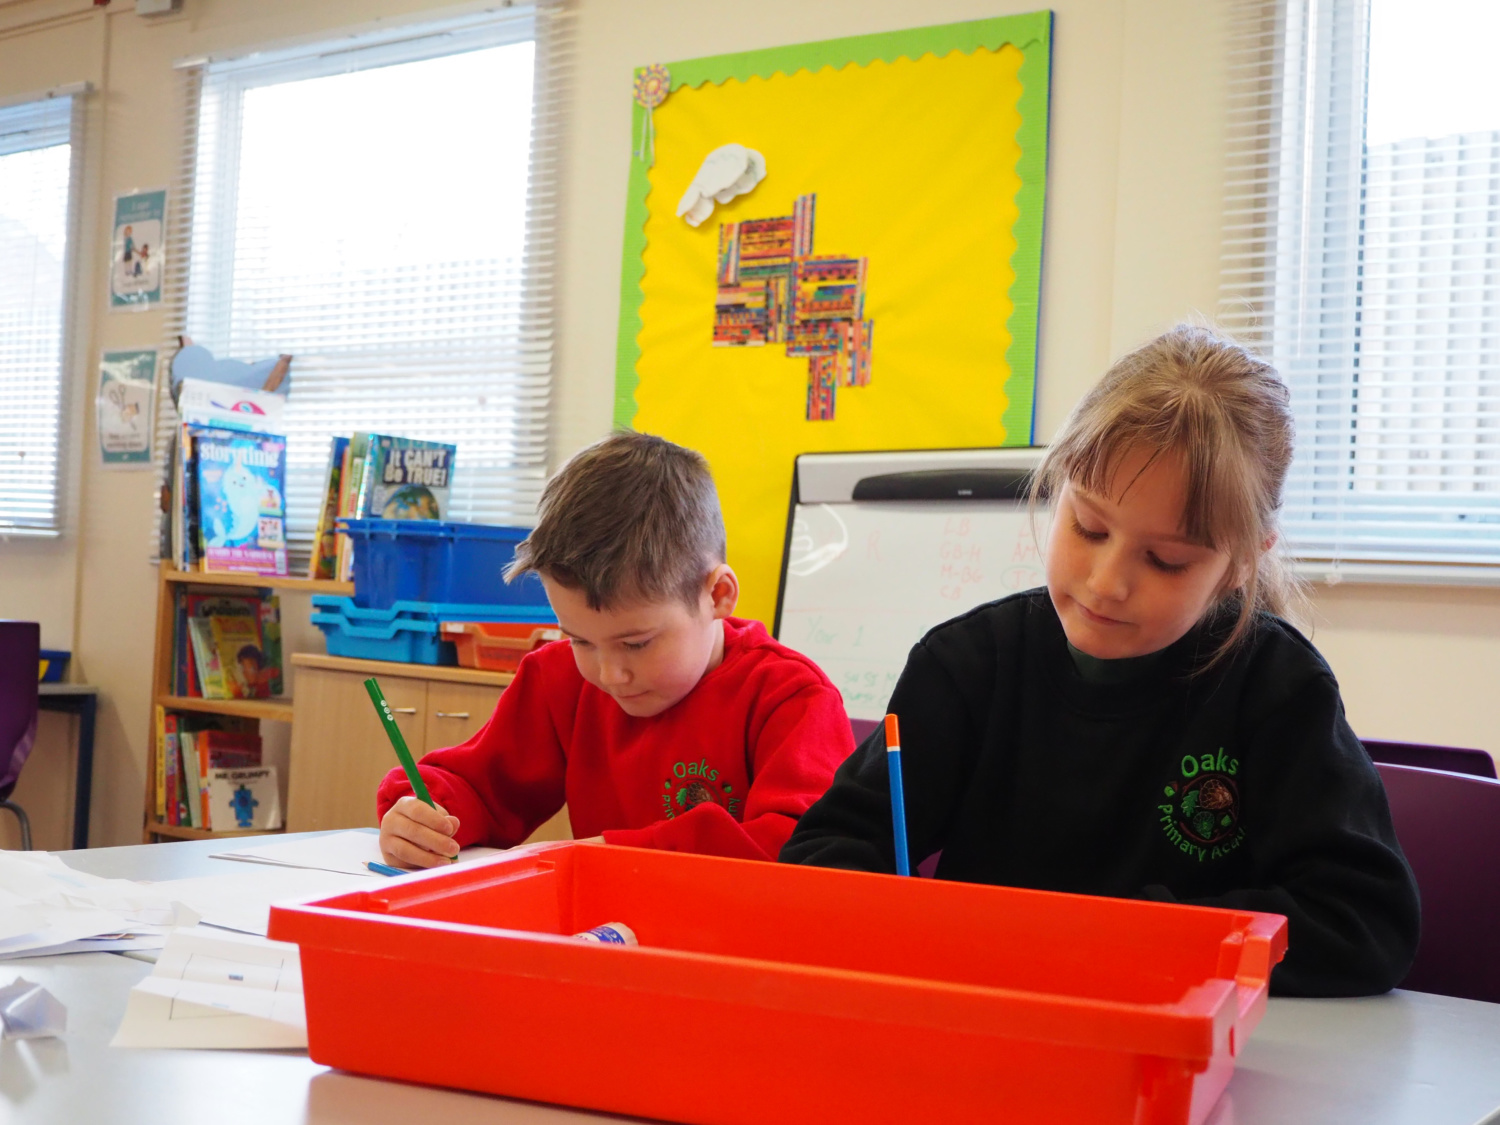 Two pupils are shown working together at a desk with pencils in their hands.